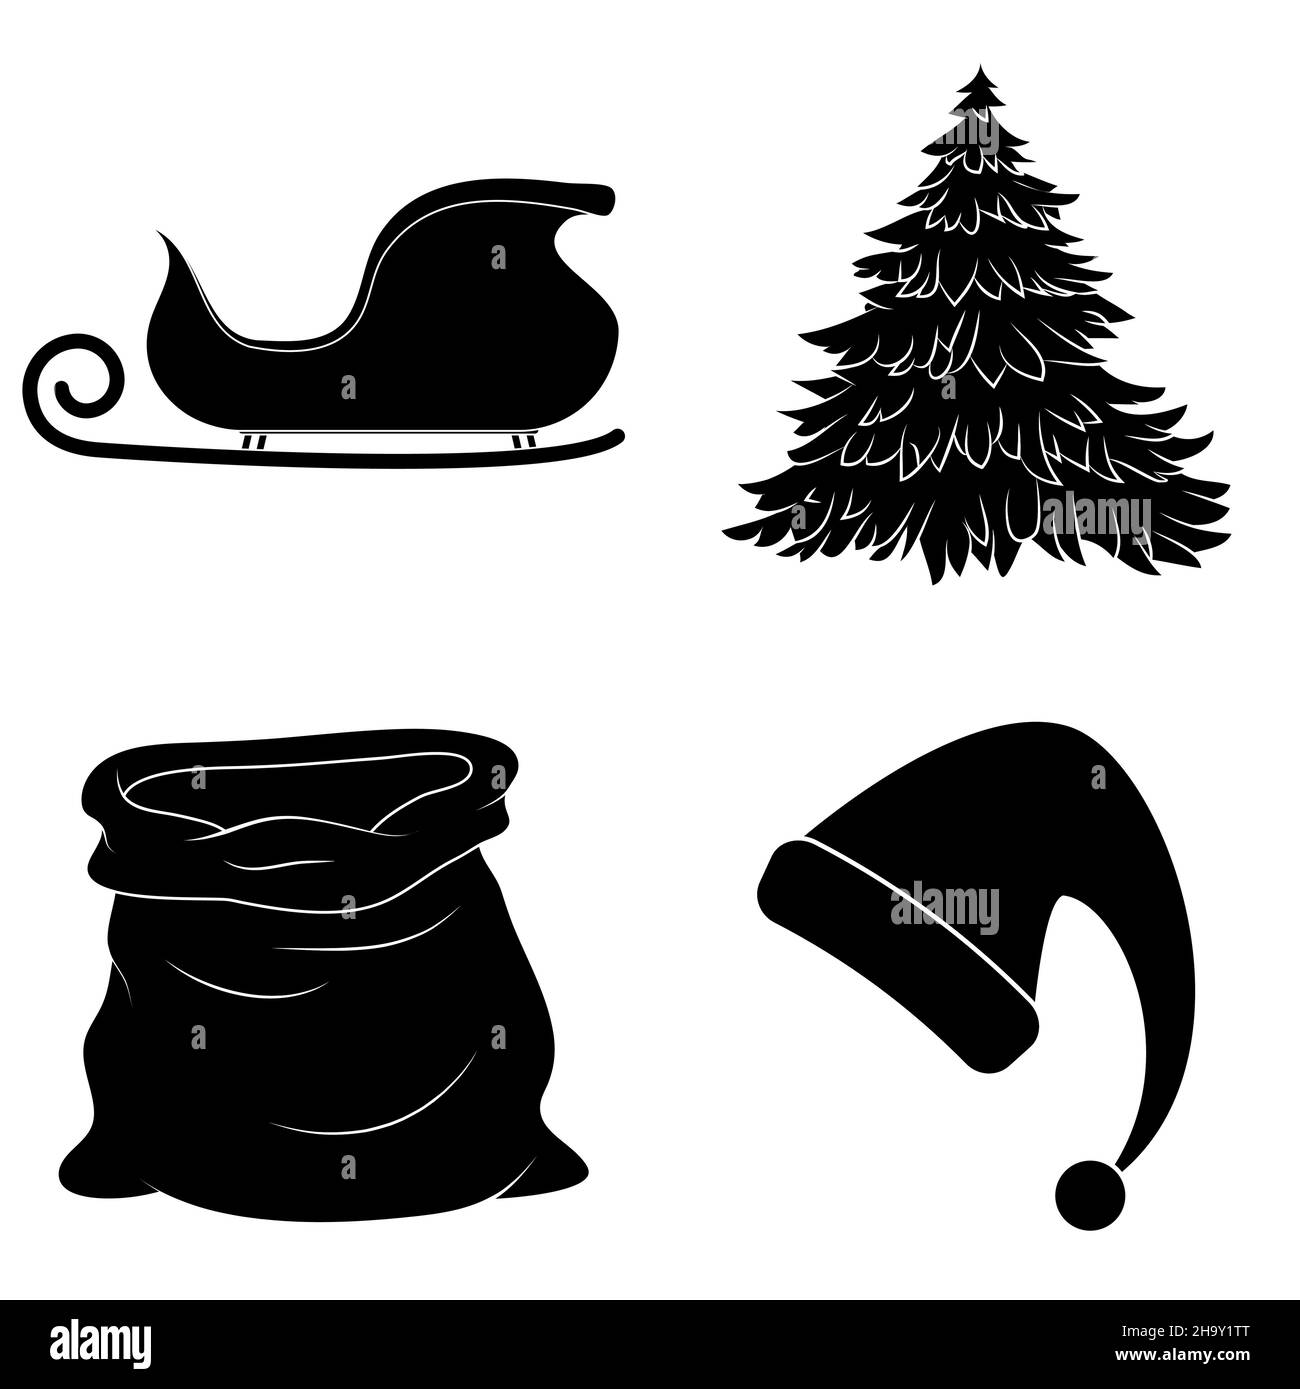 Christmas silhouette icon set. Collection of black december holiday symbol. Black and white illustration isolated on white background. Stock Vector